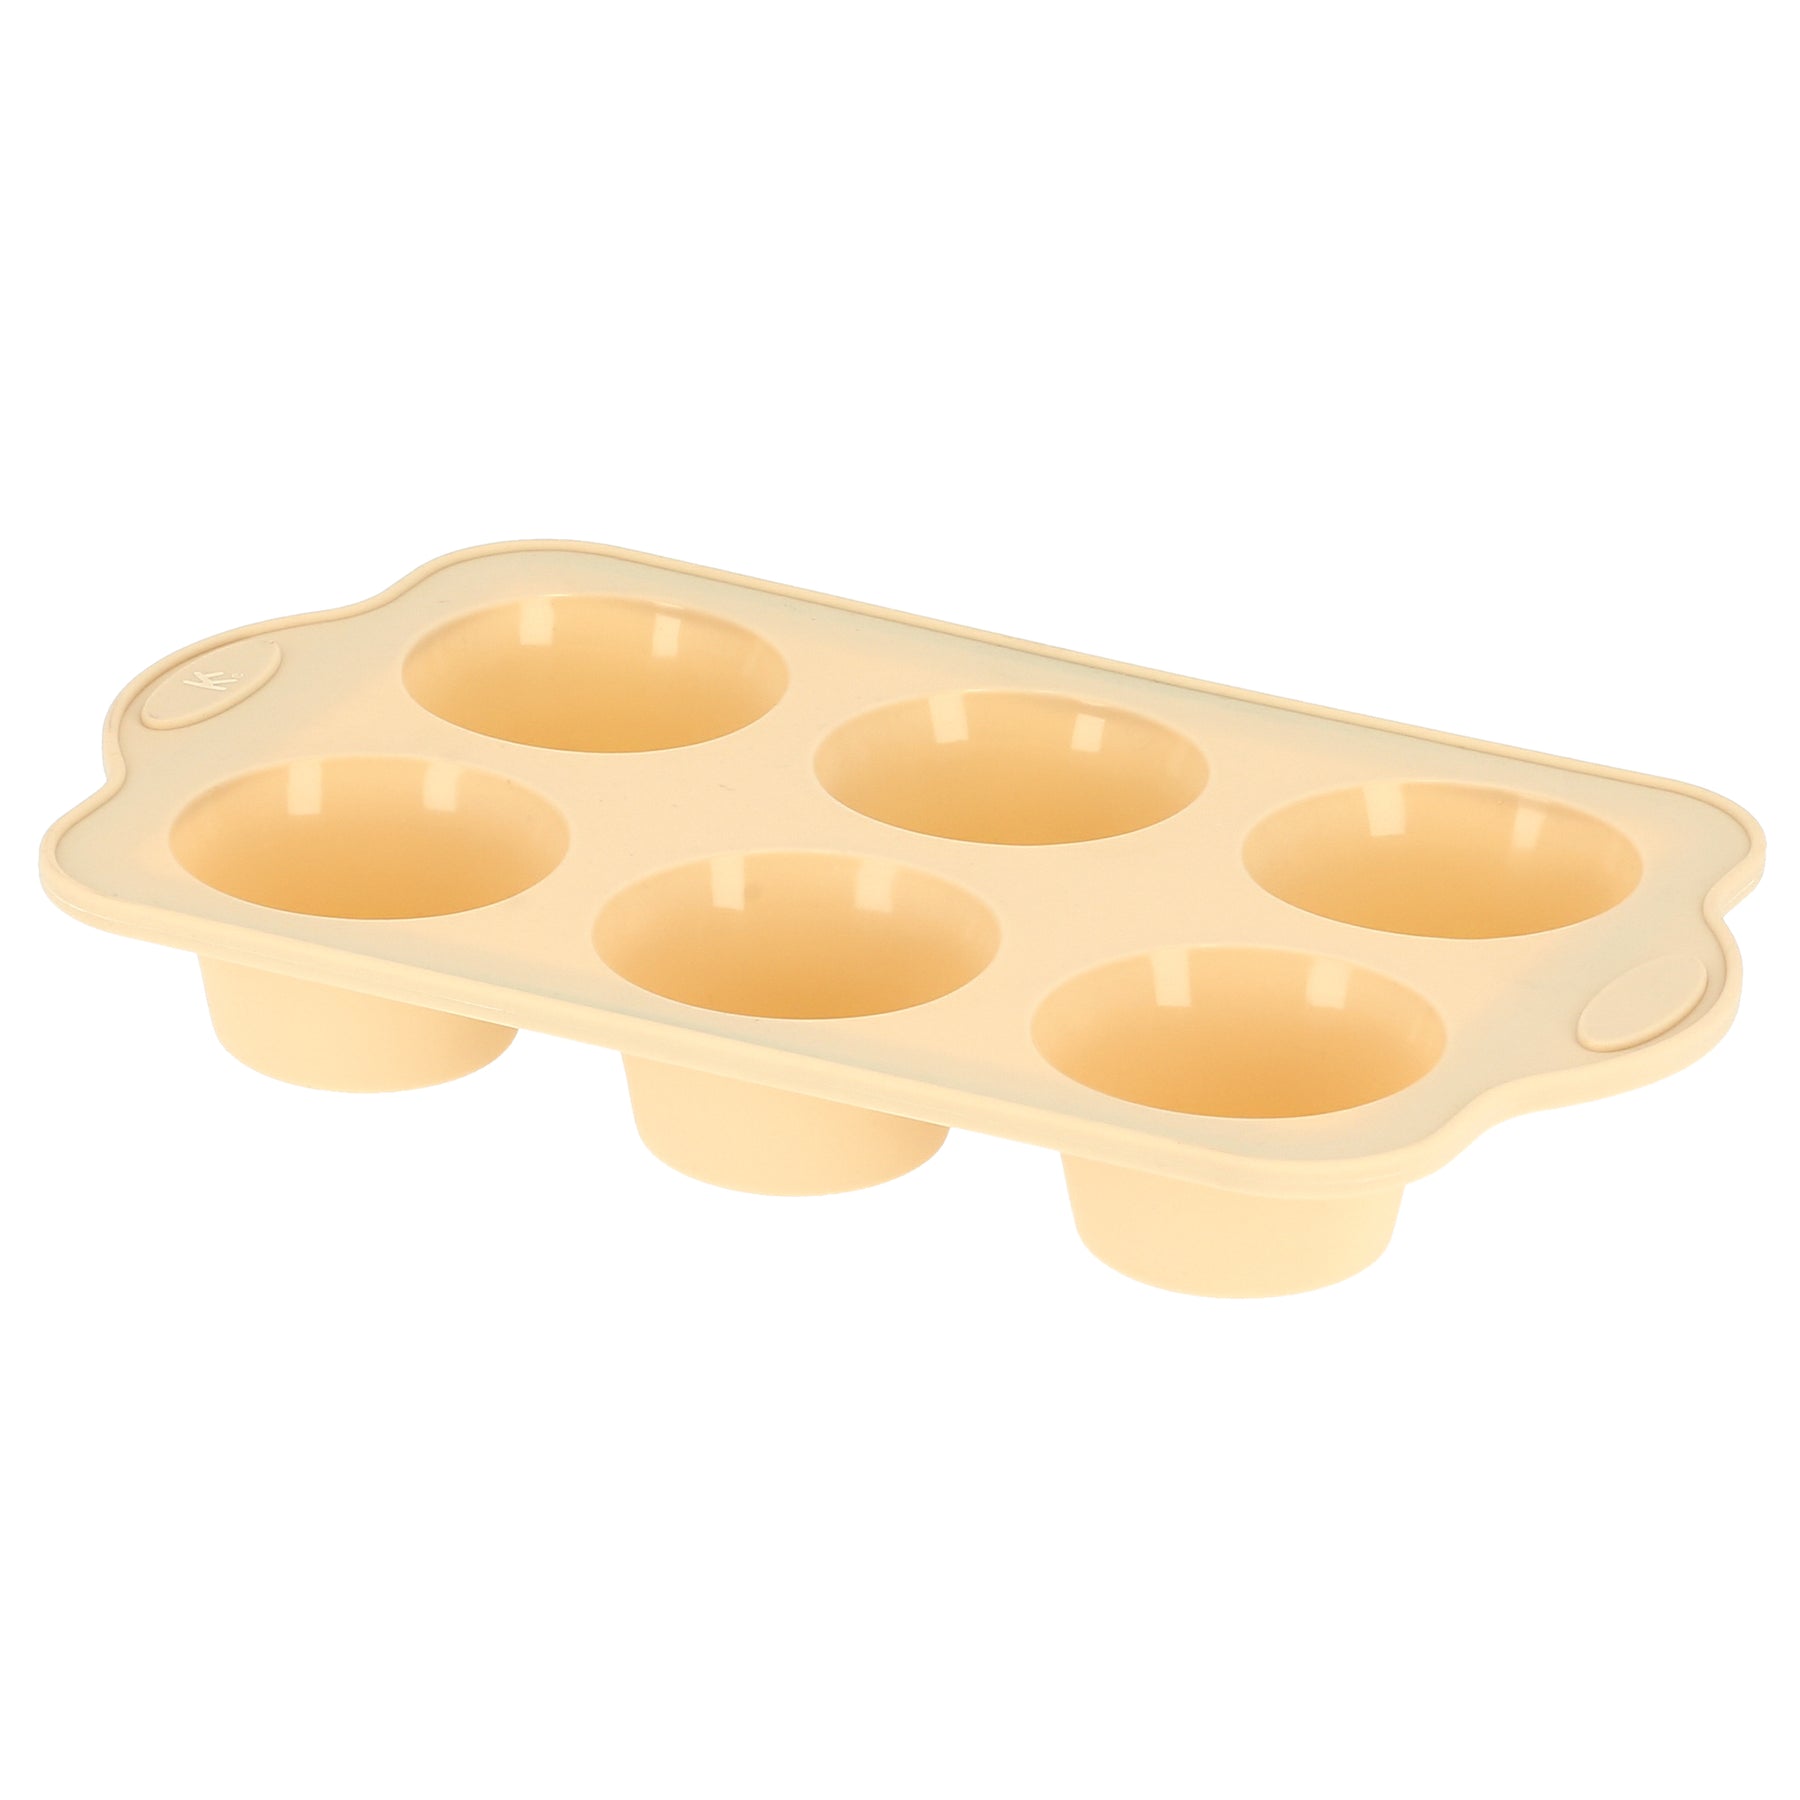 Royalford 8-Cup Silicone Muffin Baking Tray 